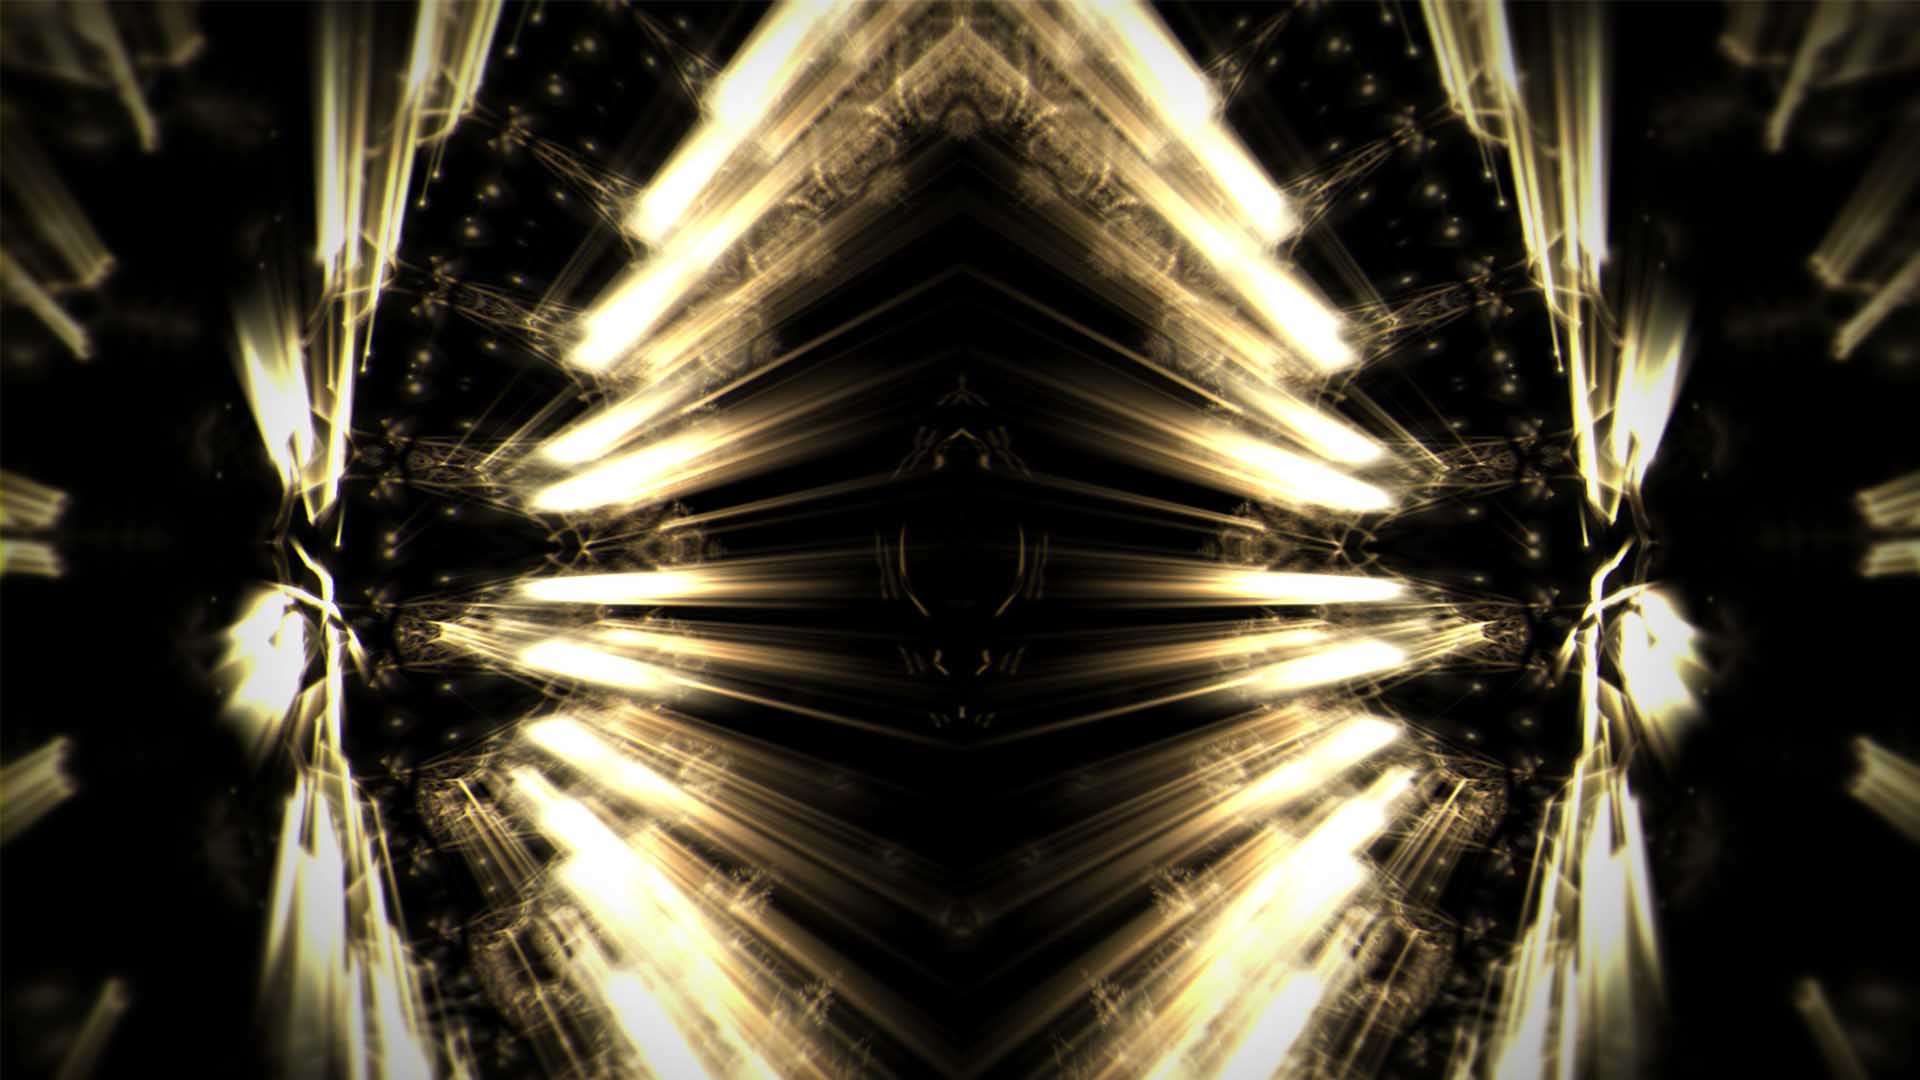 Gold_Abstract_Pattern_Golden_Tree_Video_Footage_Animated_motion_background_vj_loop